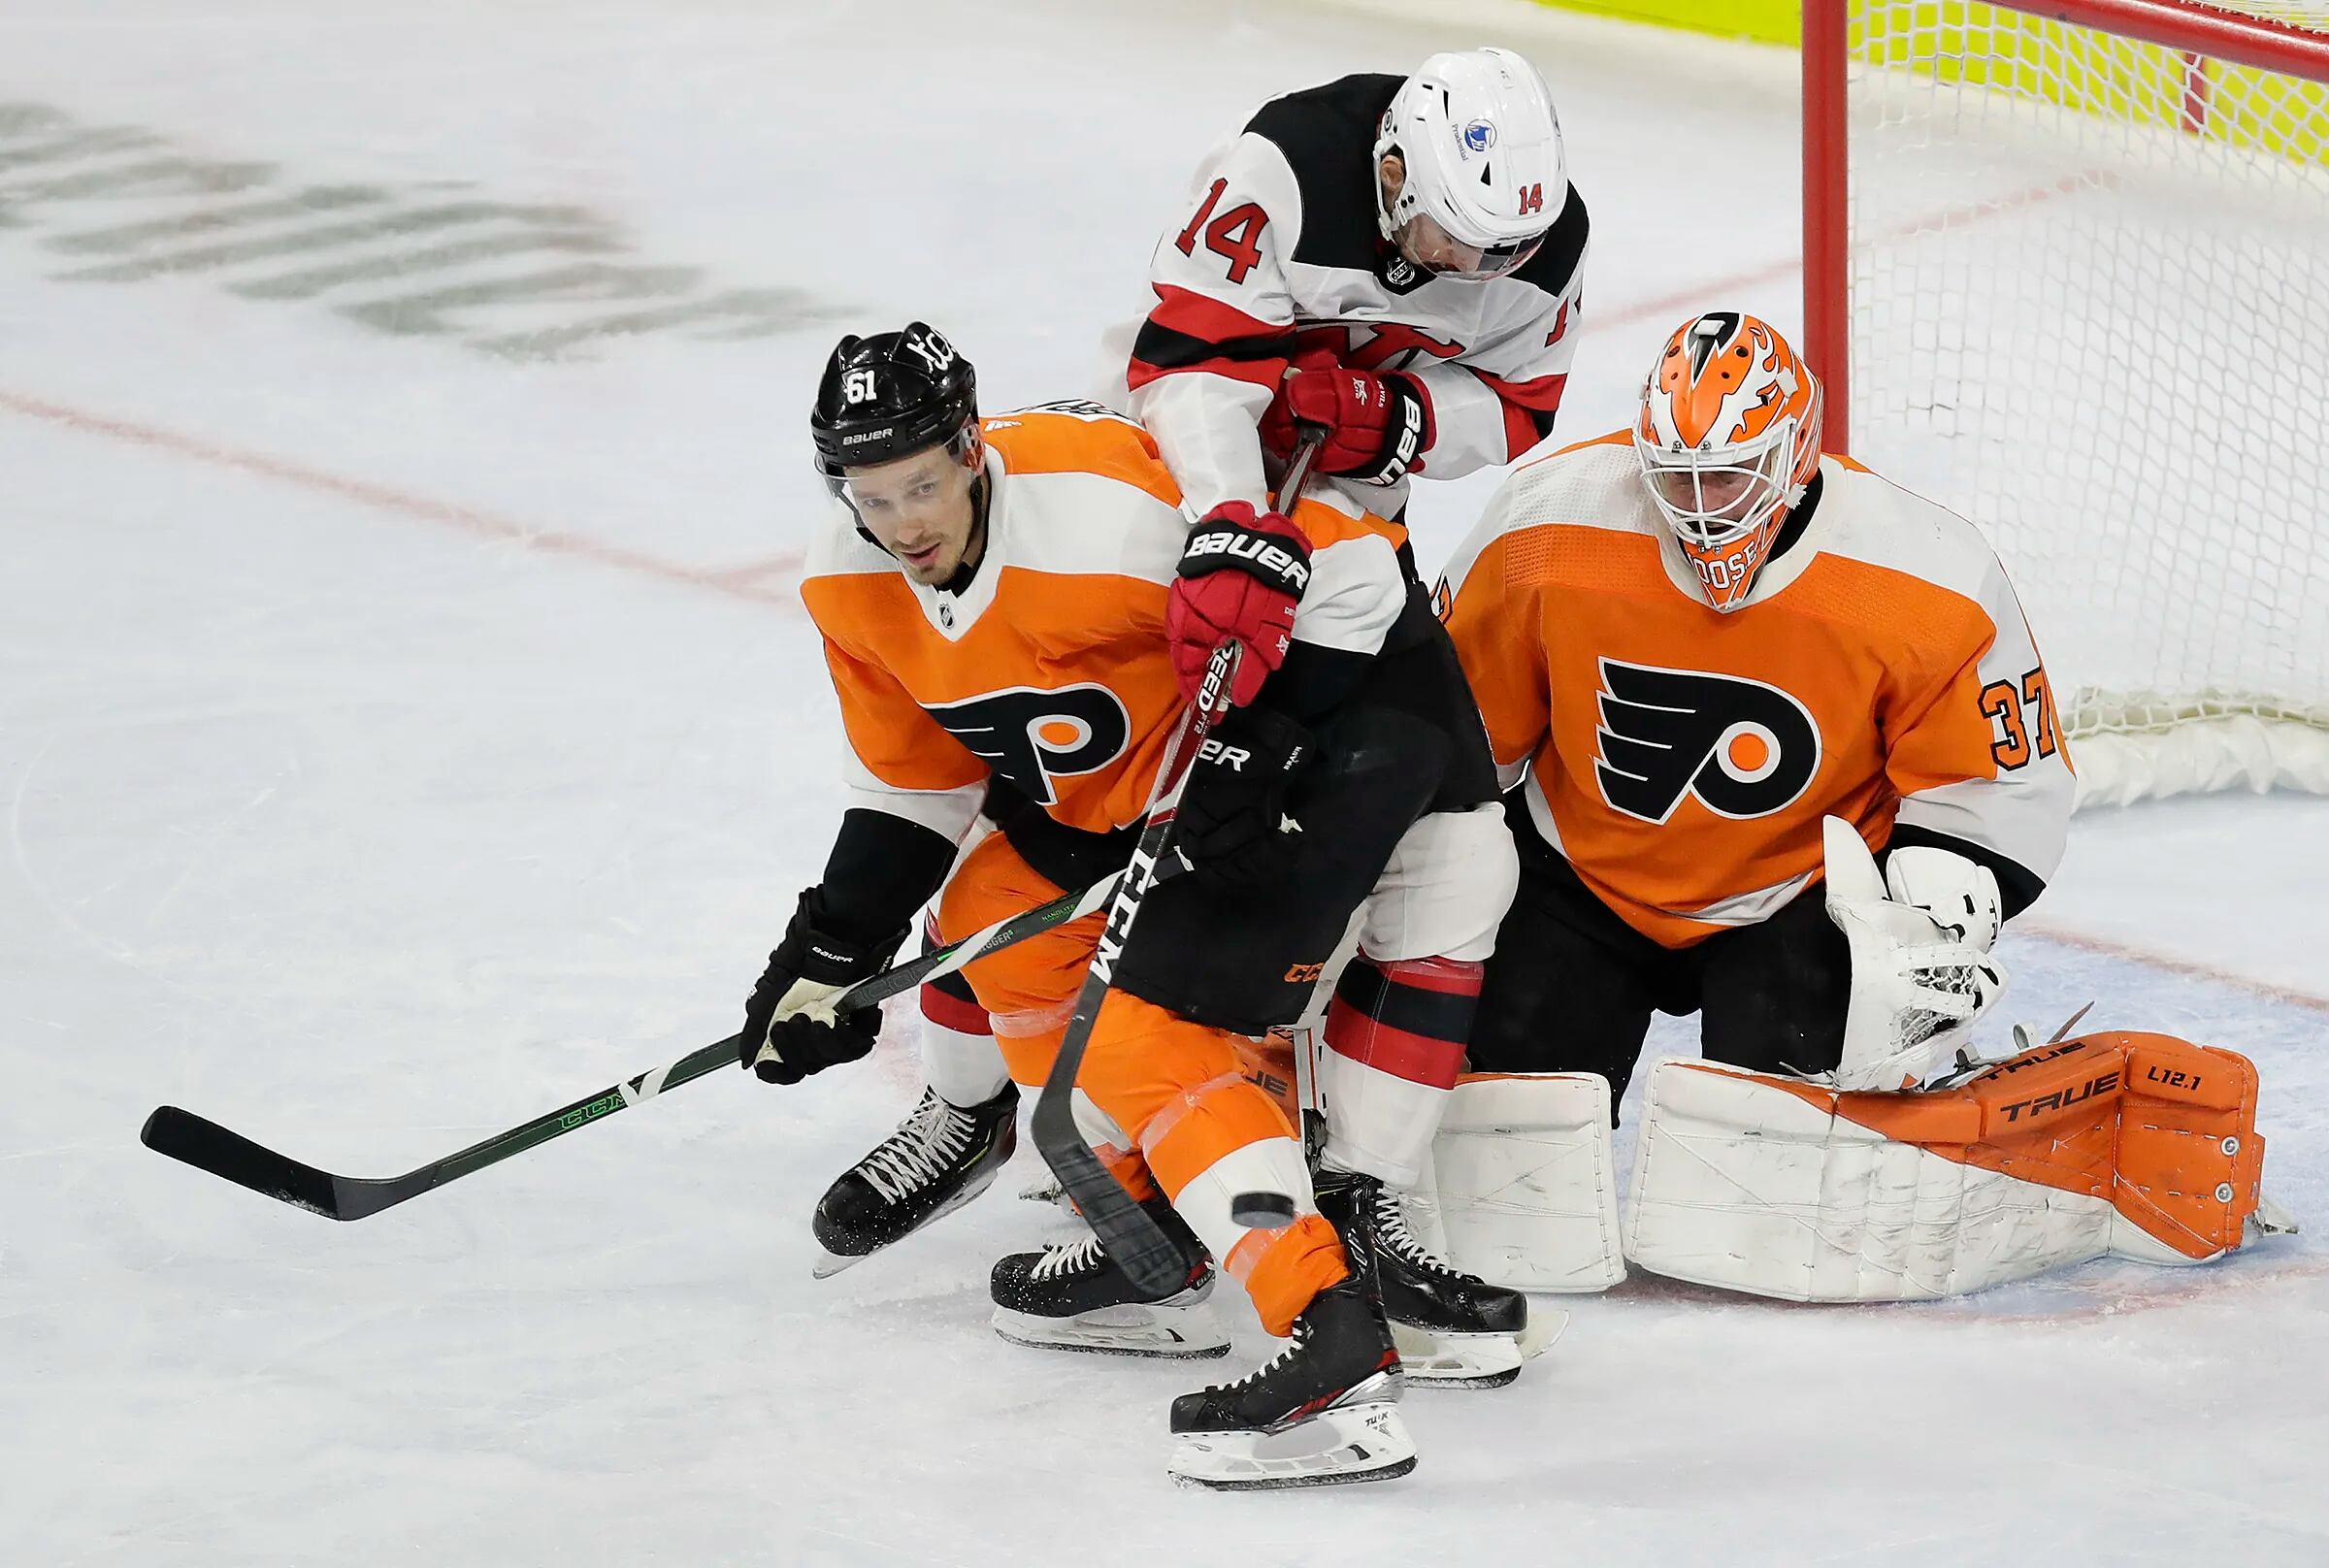 Flyers end crushing season with 4-2 win over Devils